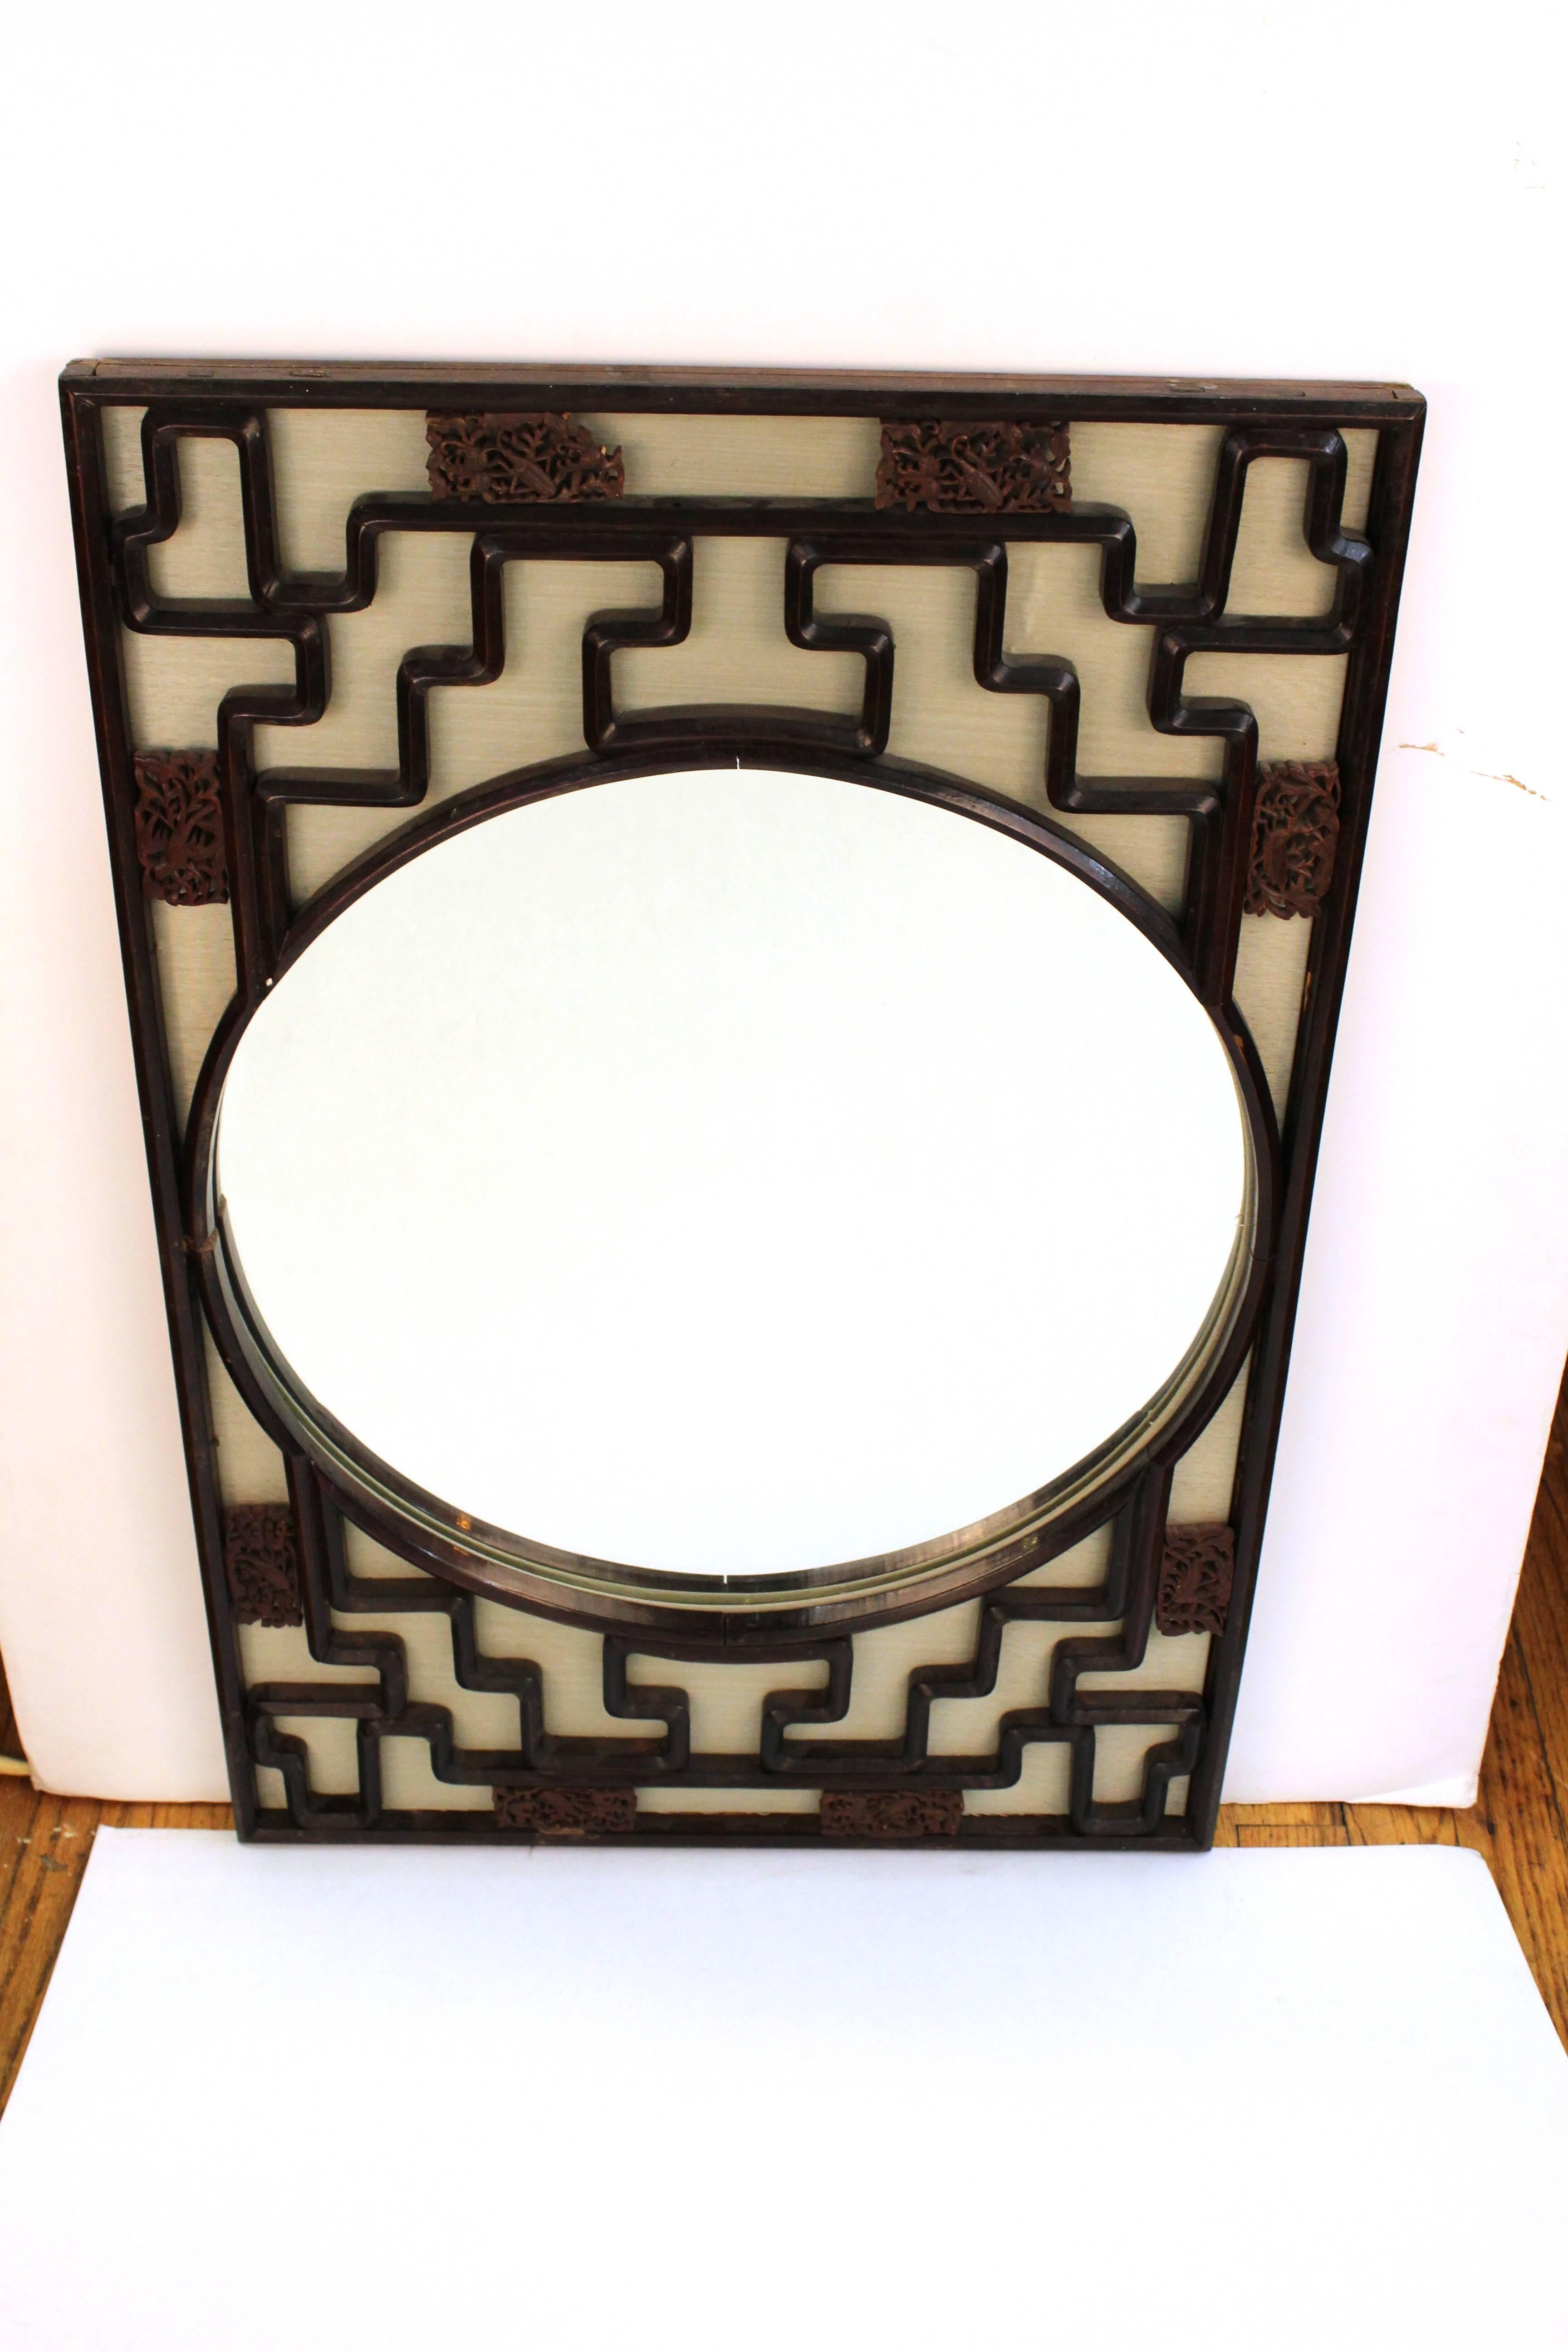 A round wall mirror from Gump's in an Asian inspired Chinese Chippendale style frame. The dark wood frame features cutouts that make geometric patterns as well as intricately carved decorative segments against a light grey woven textile mounted